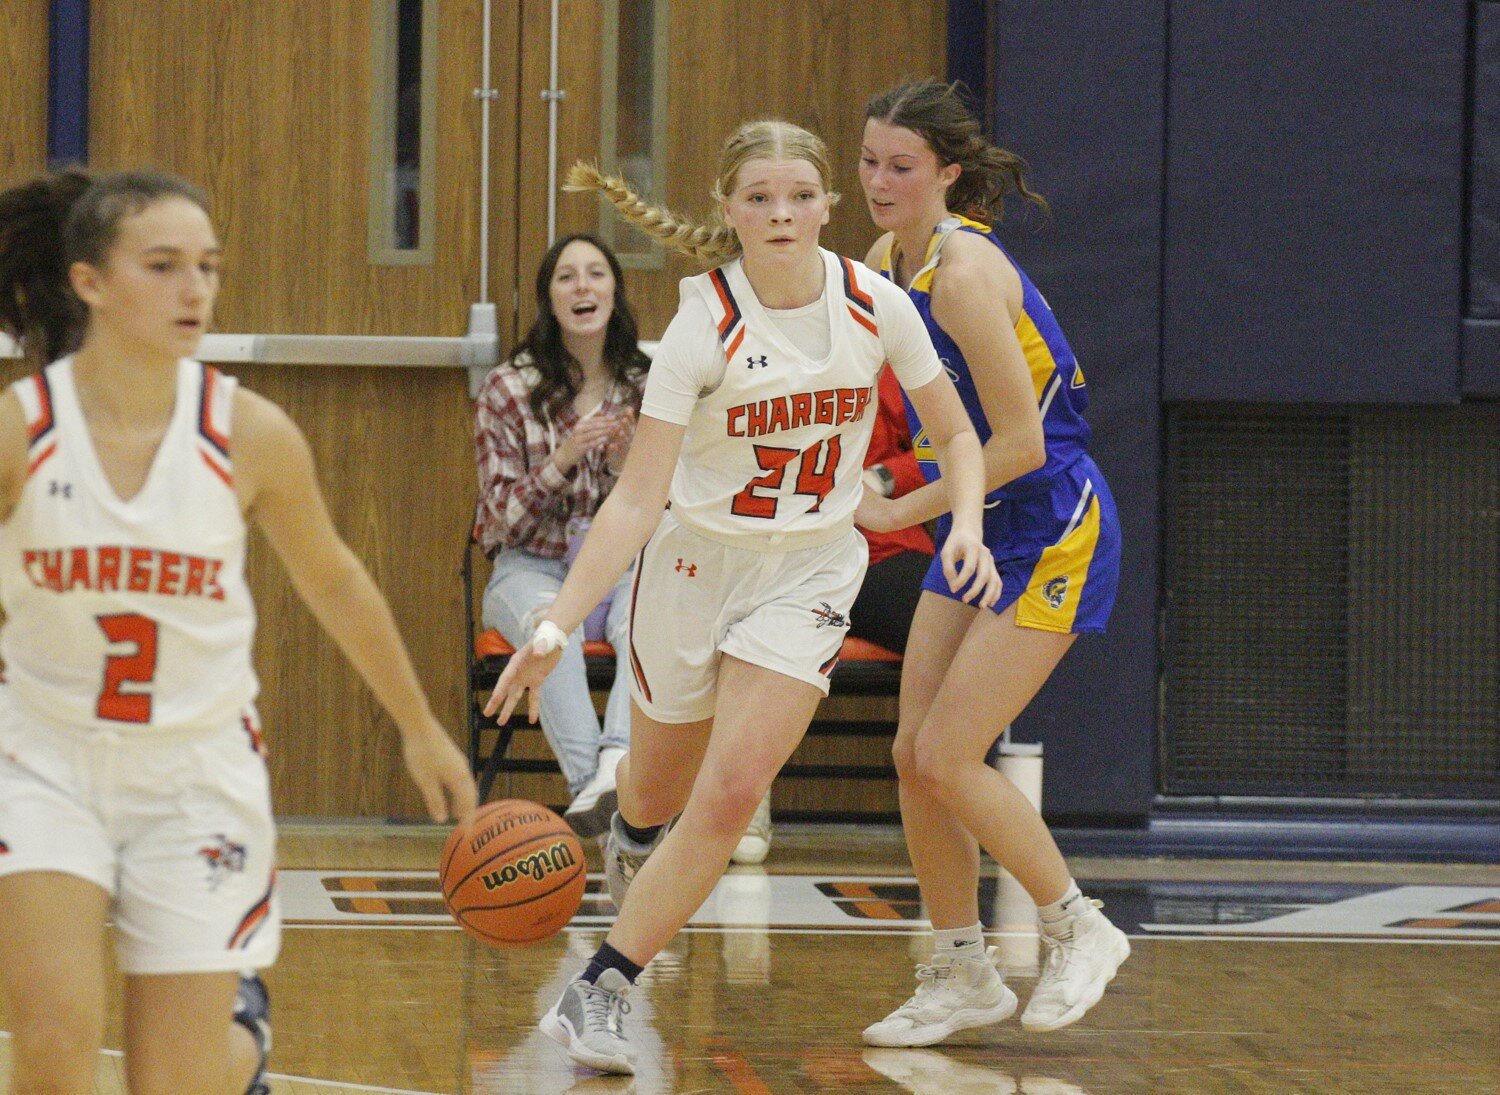 Freshman Caelyn Carpenter had been a key defender for the Chargers in her first varsity season.